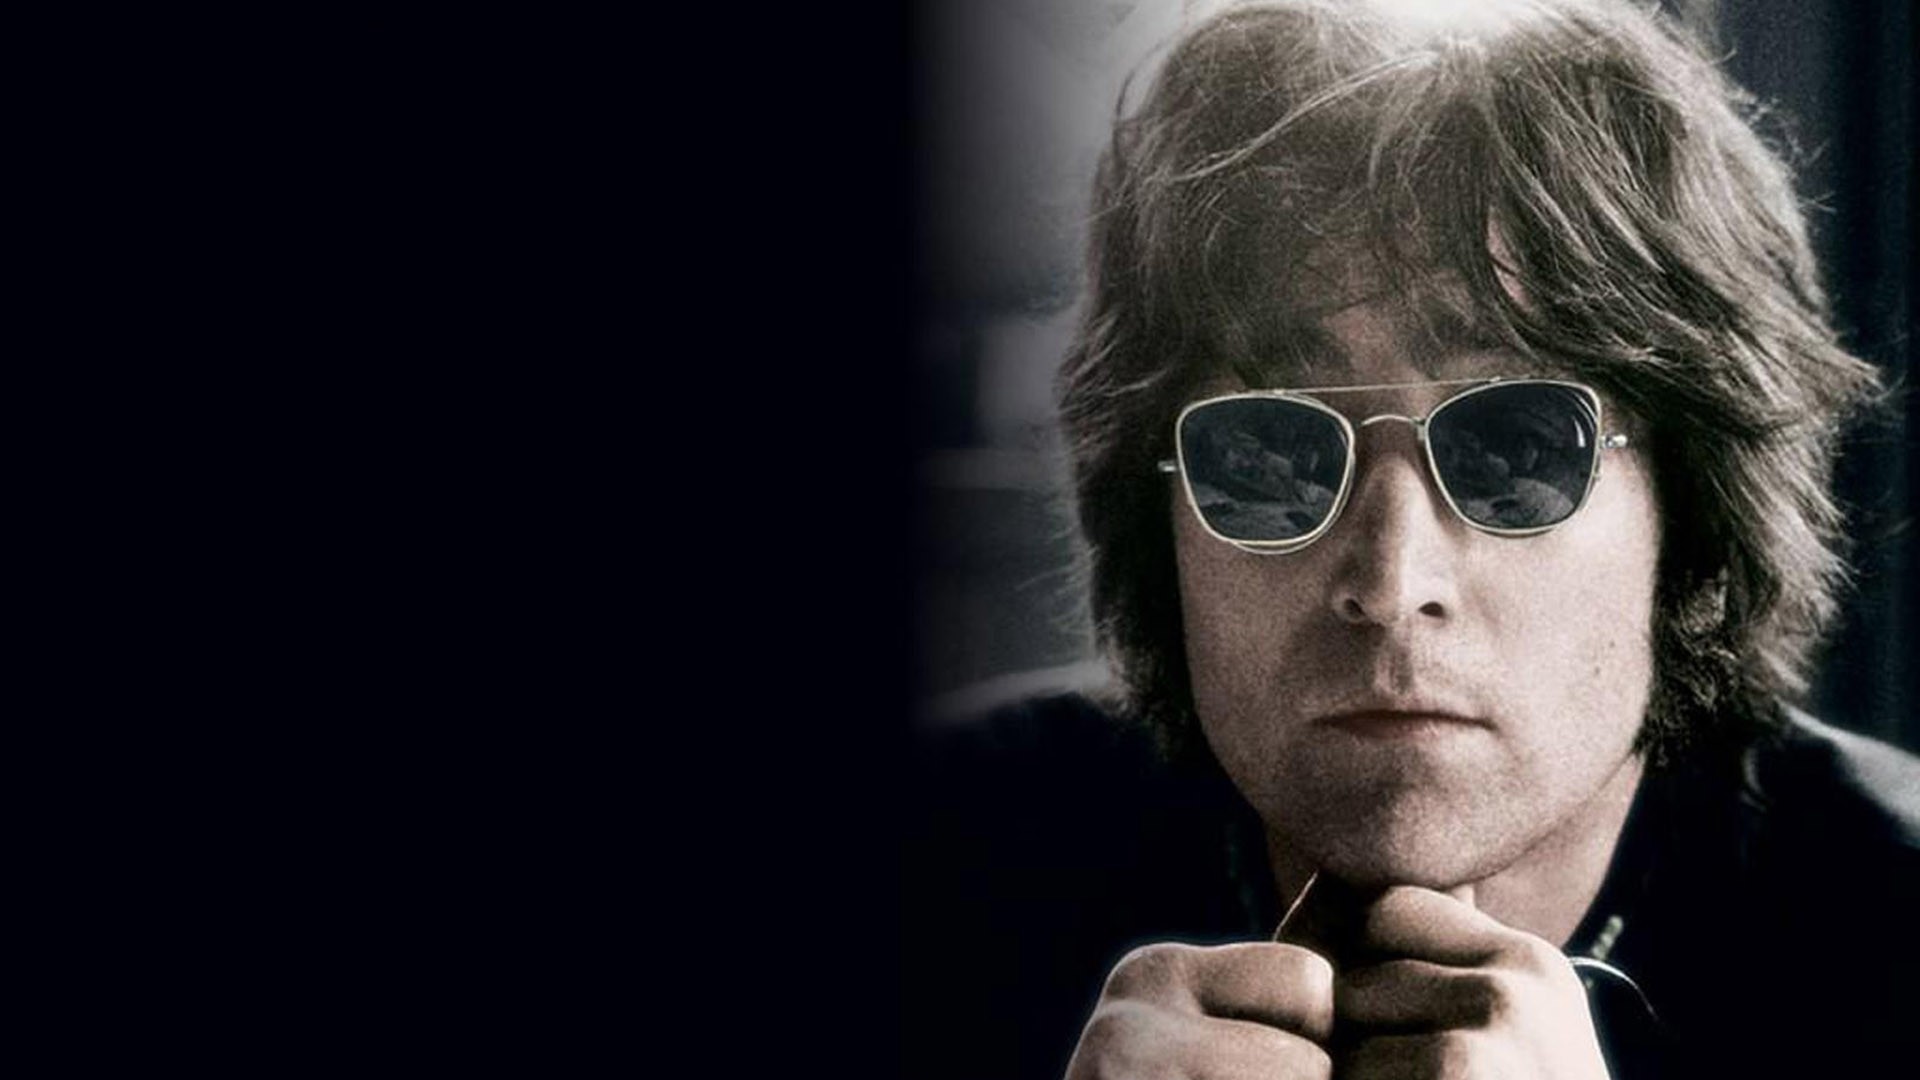 John Lennon wearing sunglasses with his hands on his chin